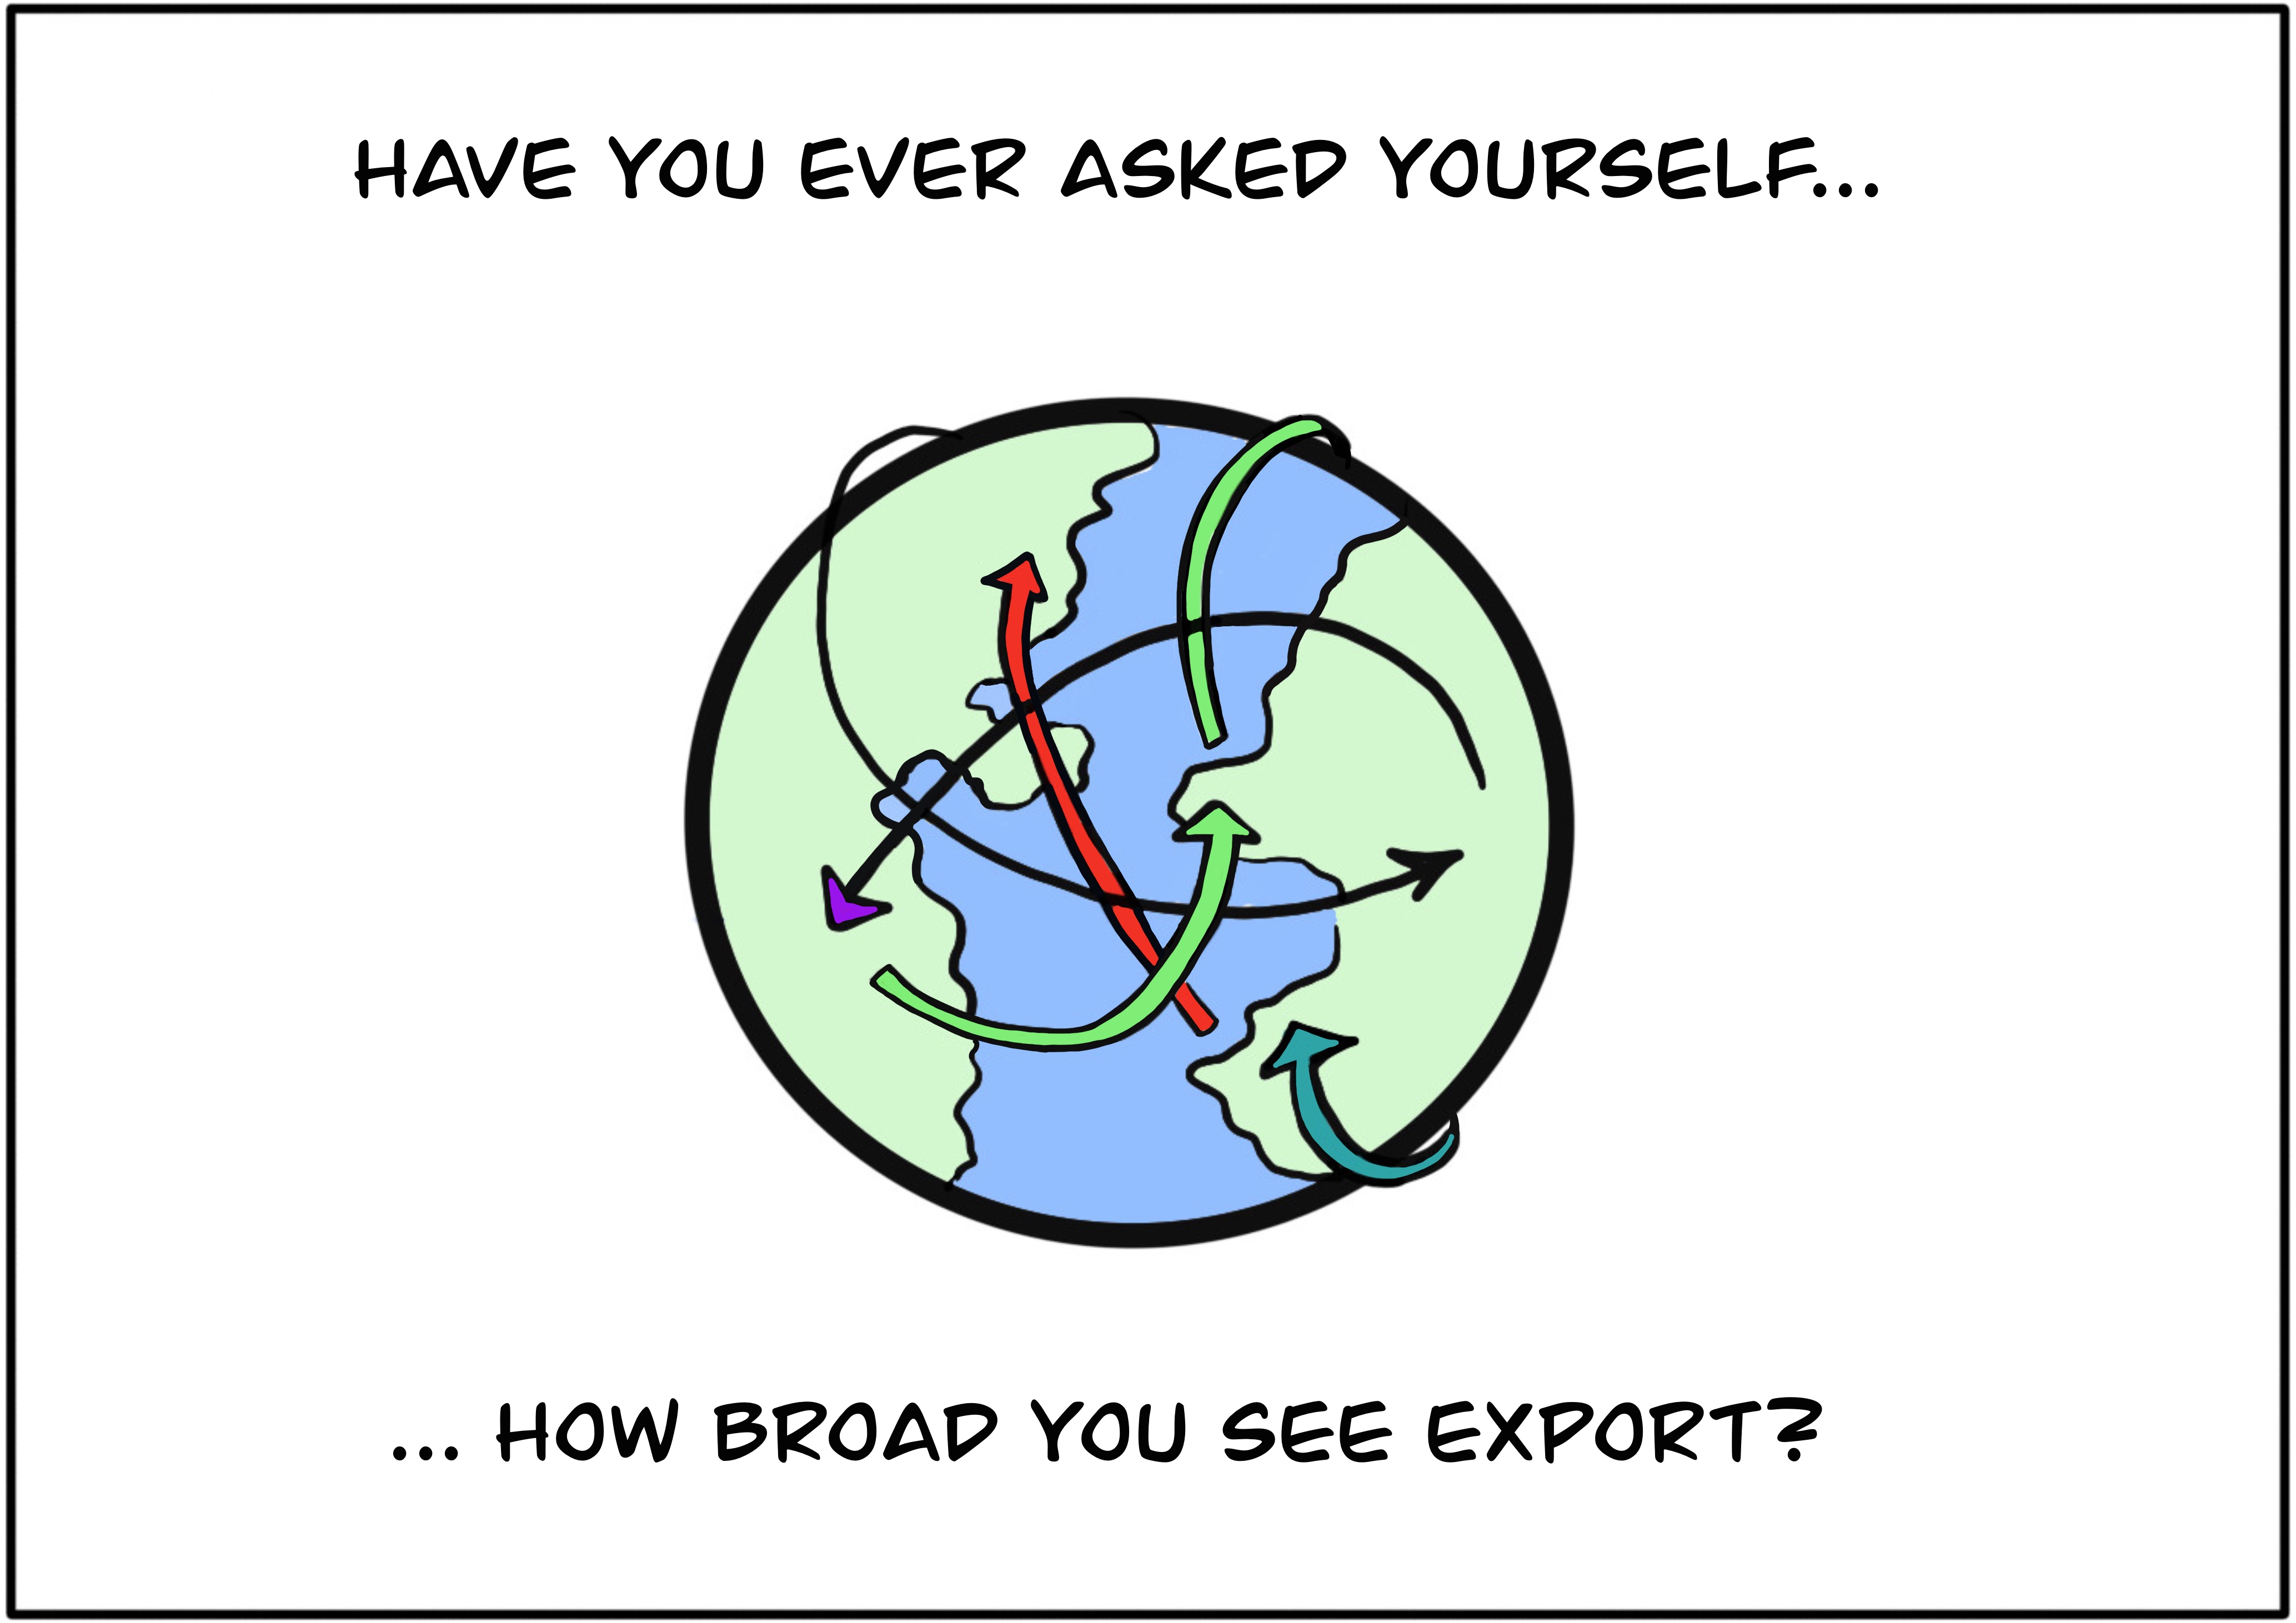 Have you ever asked yourself, how broad you see export?